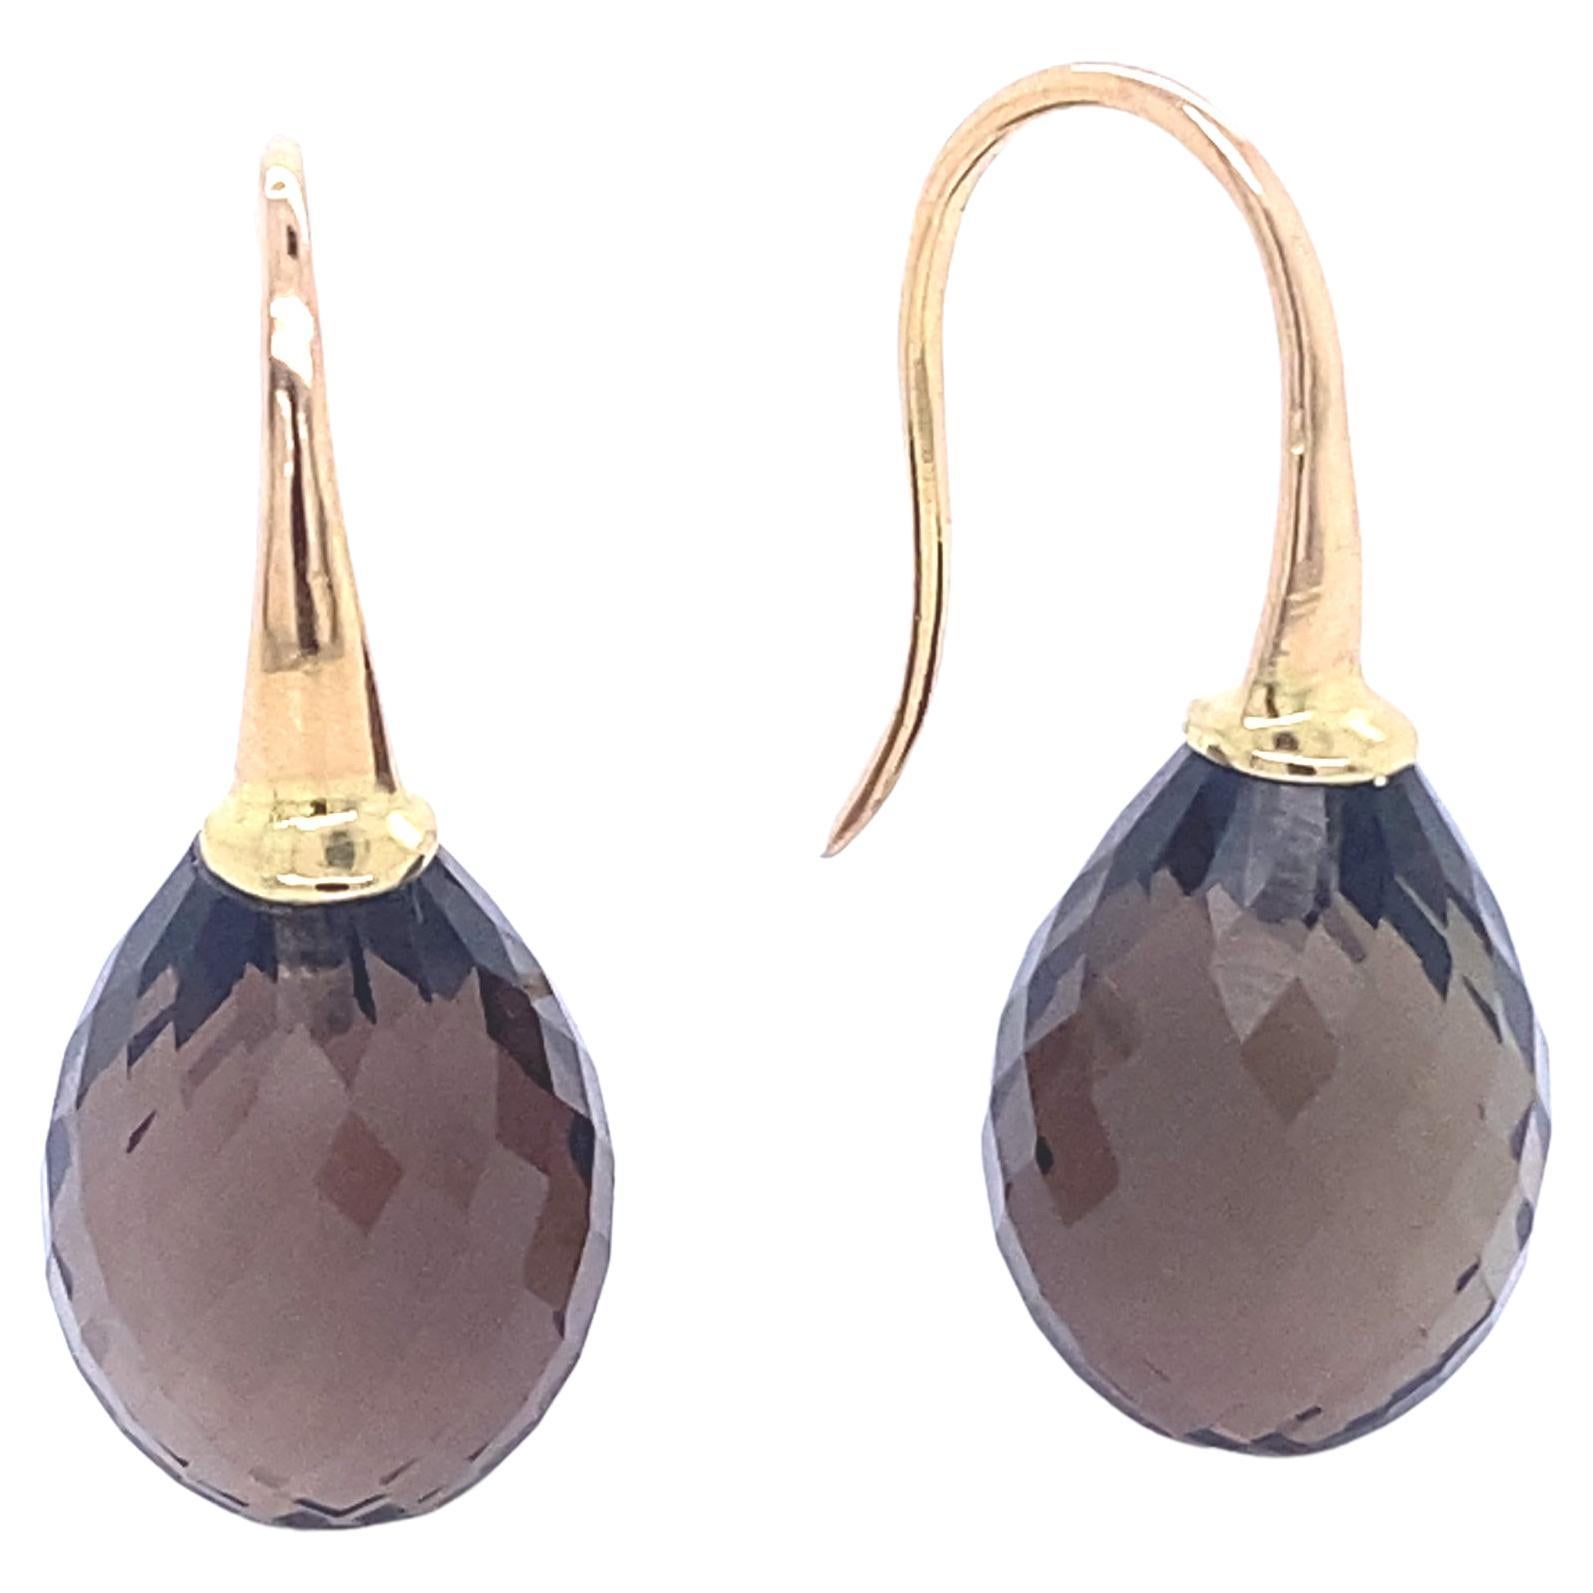 Discover these magnificent earrings in 18-carat yellow gold, topped with smoky quartz, part of the Mesure et Art du Temps French collection. These earrings are a true jewel of style and elegance, adding a touch of sophistication to your outfit.

The